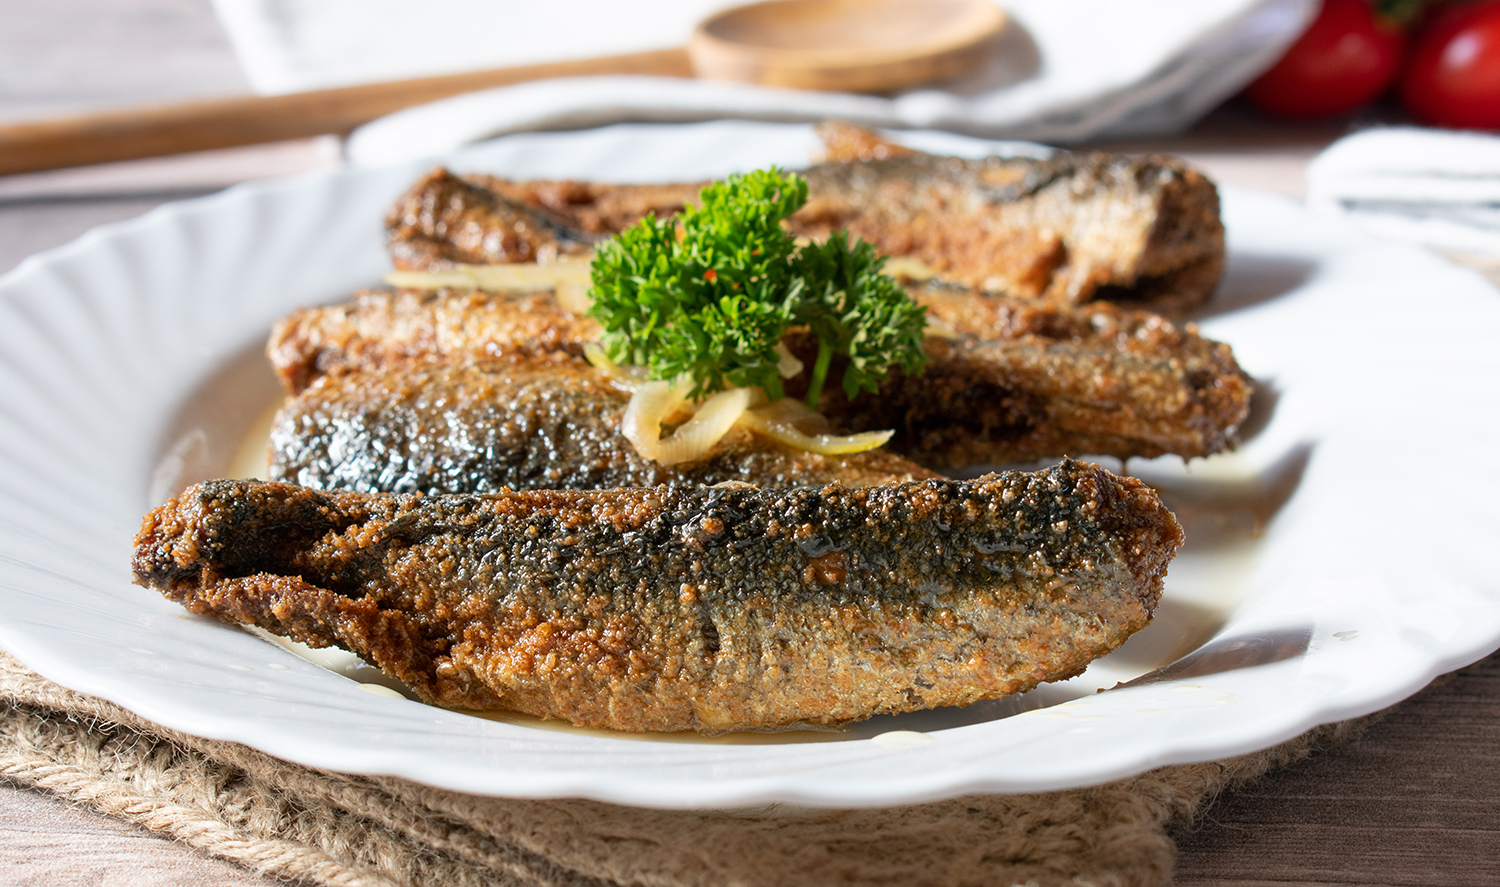 Brathering | Traditional Fish Dish From Germany